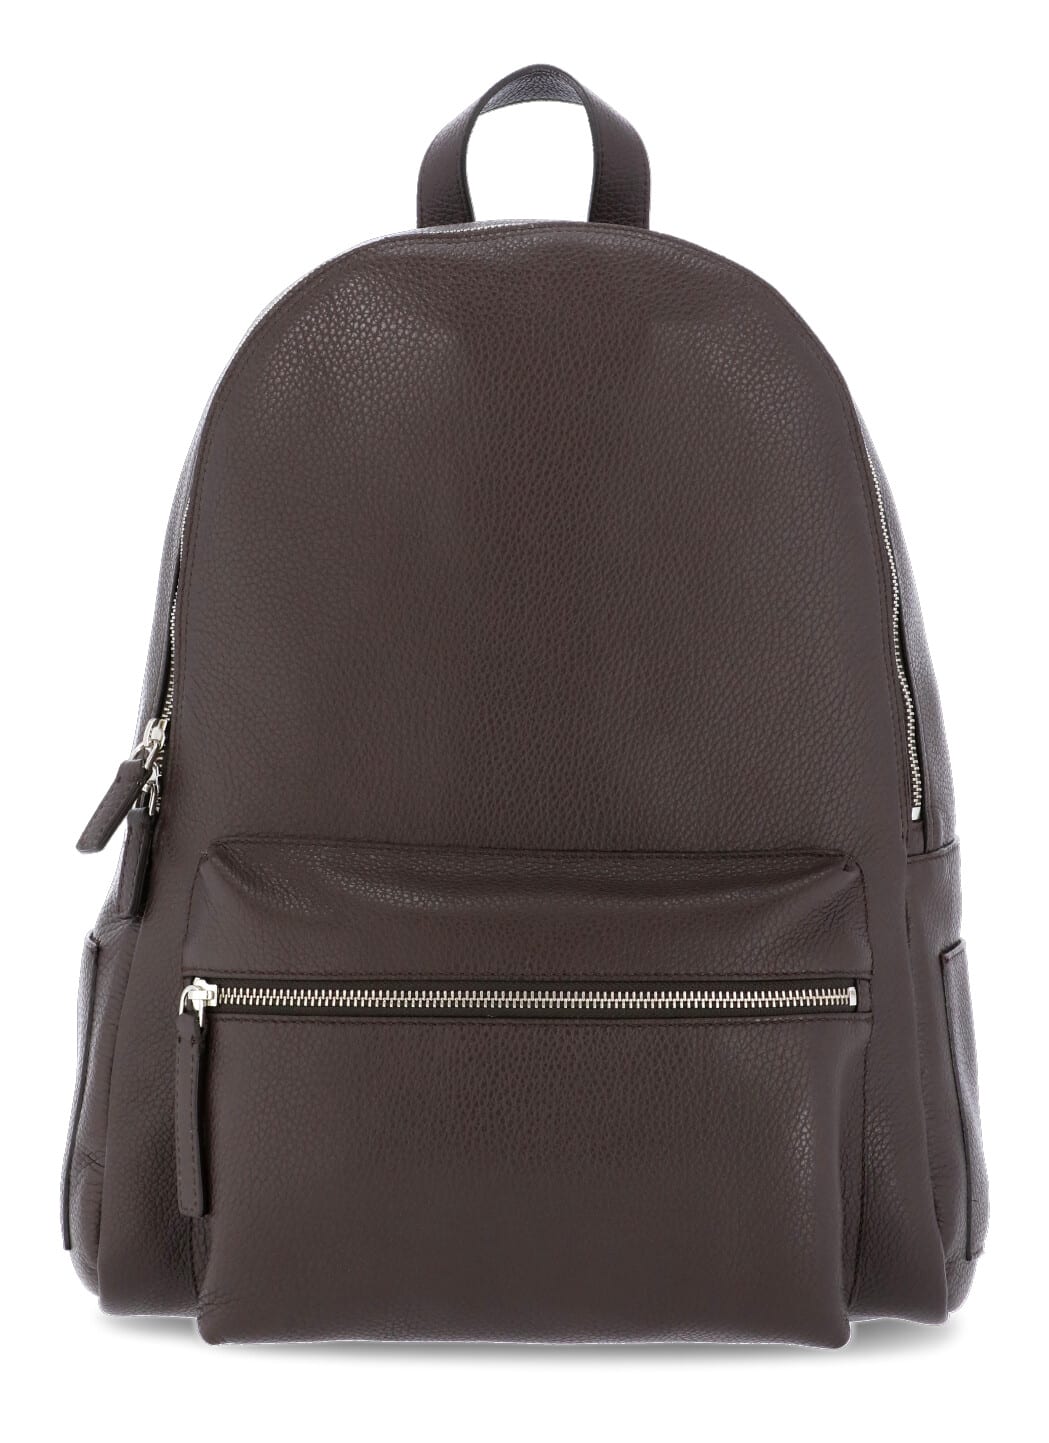 Orciani Leather Micron Backpack